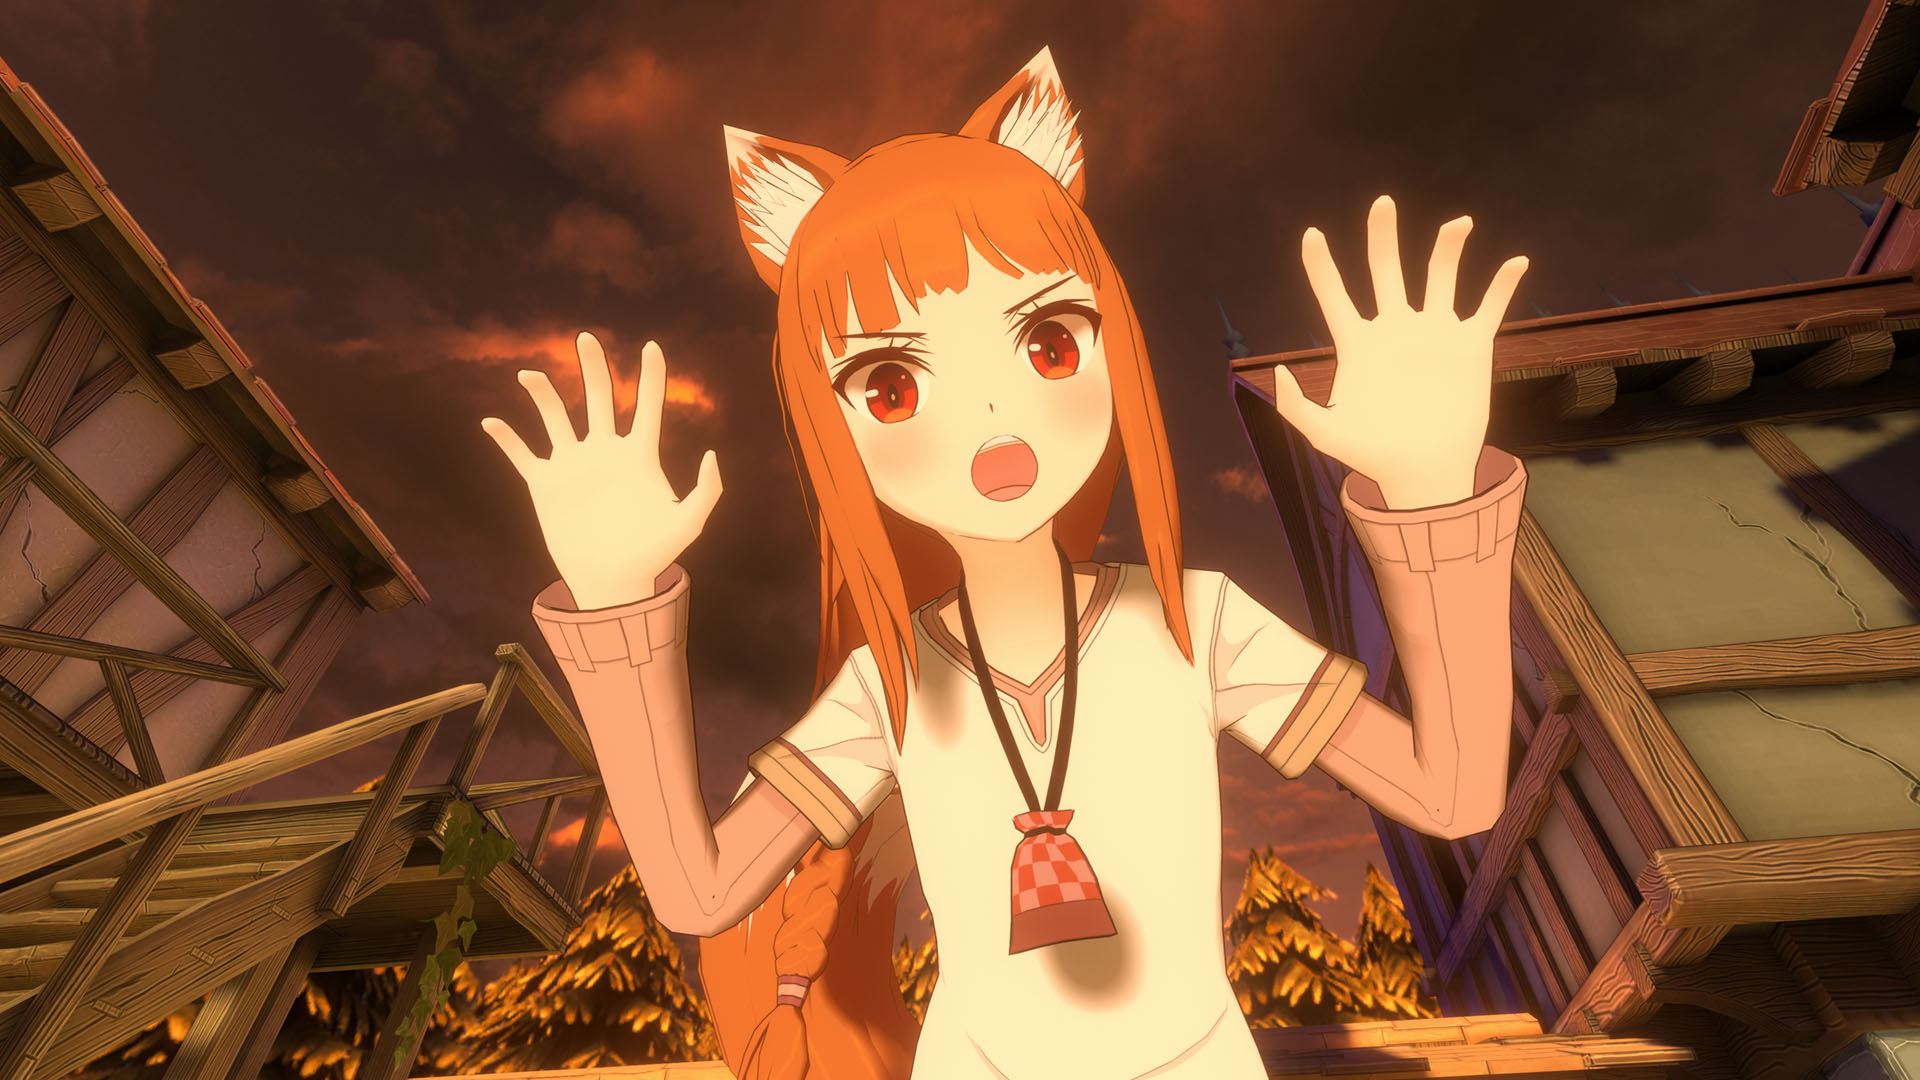 Spice And Wolf Vr 2 10 18 20 4